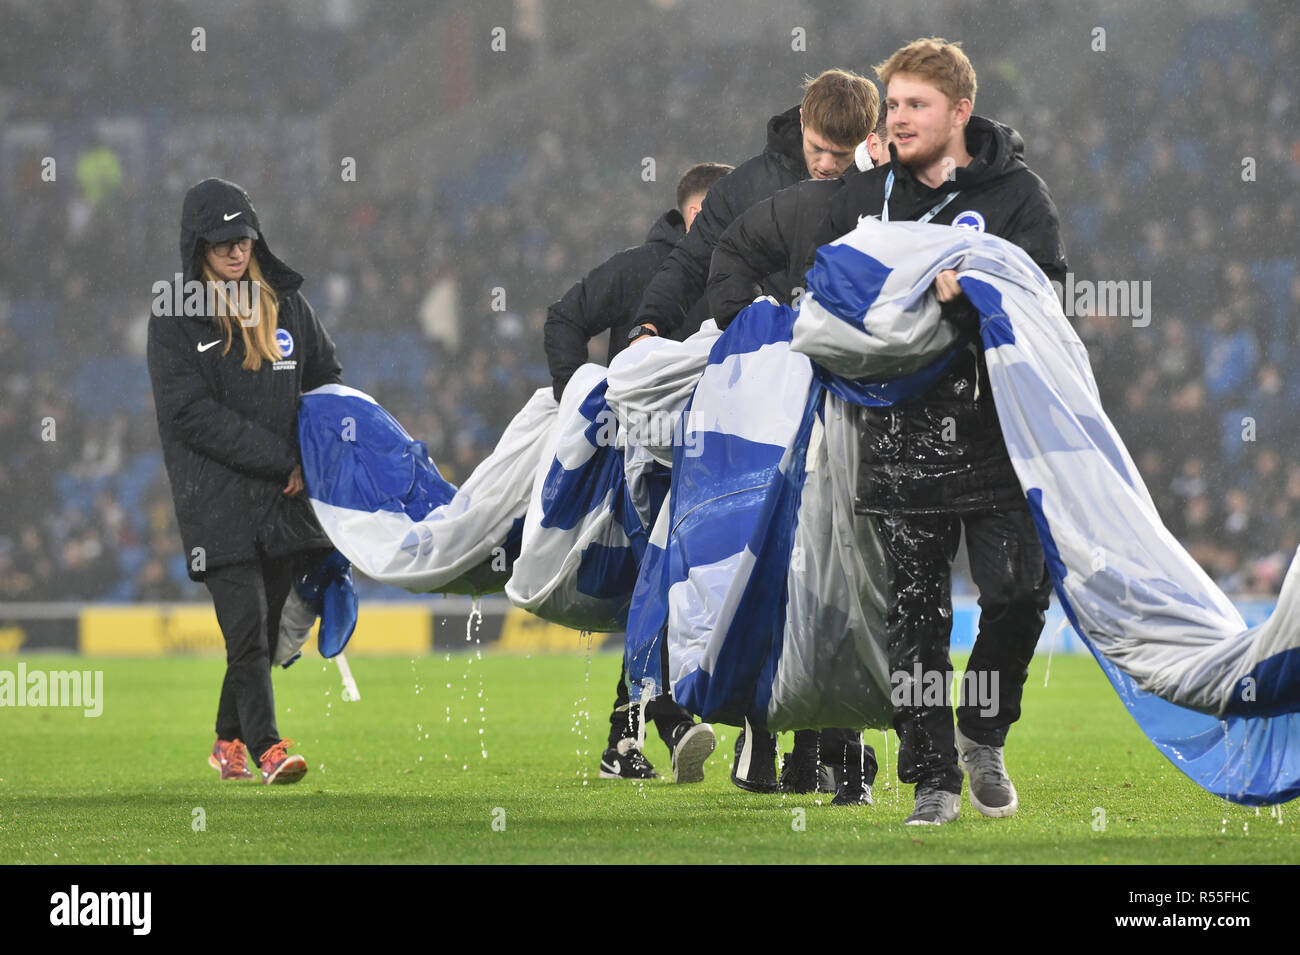 It's heavy work for the ground staff in the rain during the Premier League match between Brighton and Hove Albion and Leicester City at American Express Community Stadium , Brighton , 24 November 2018 Editorial use only. No merchandising. For Football images FA and Premier League restrictions apply inc. no internet/mobile usage without FAPL license - for details contact Football Dataco Stock Photo